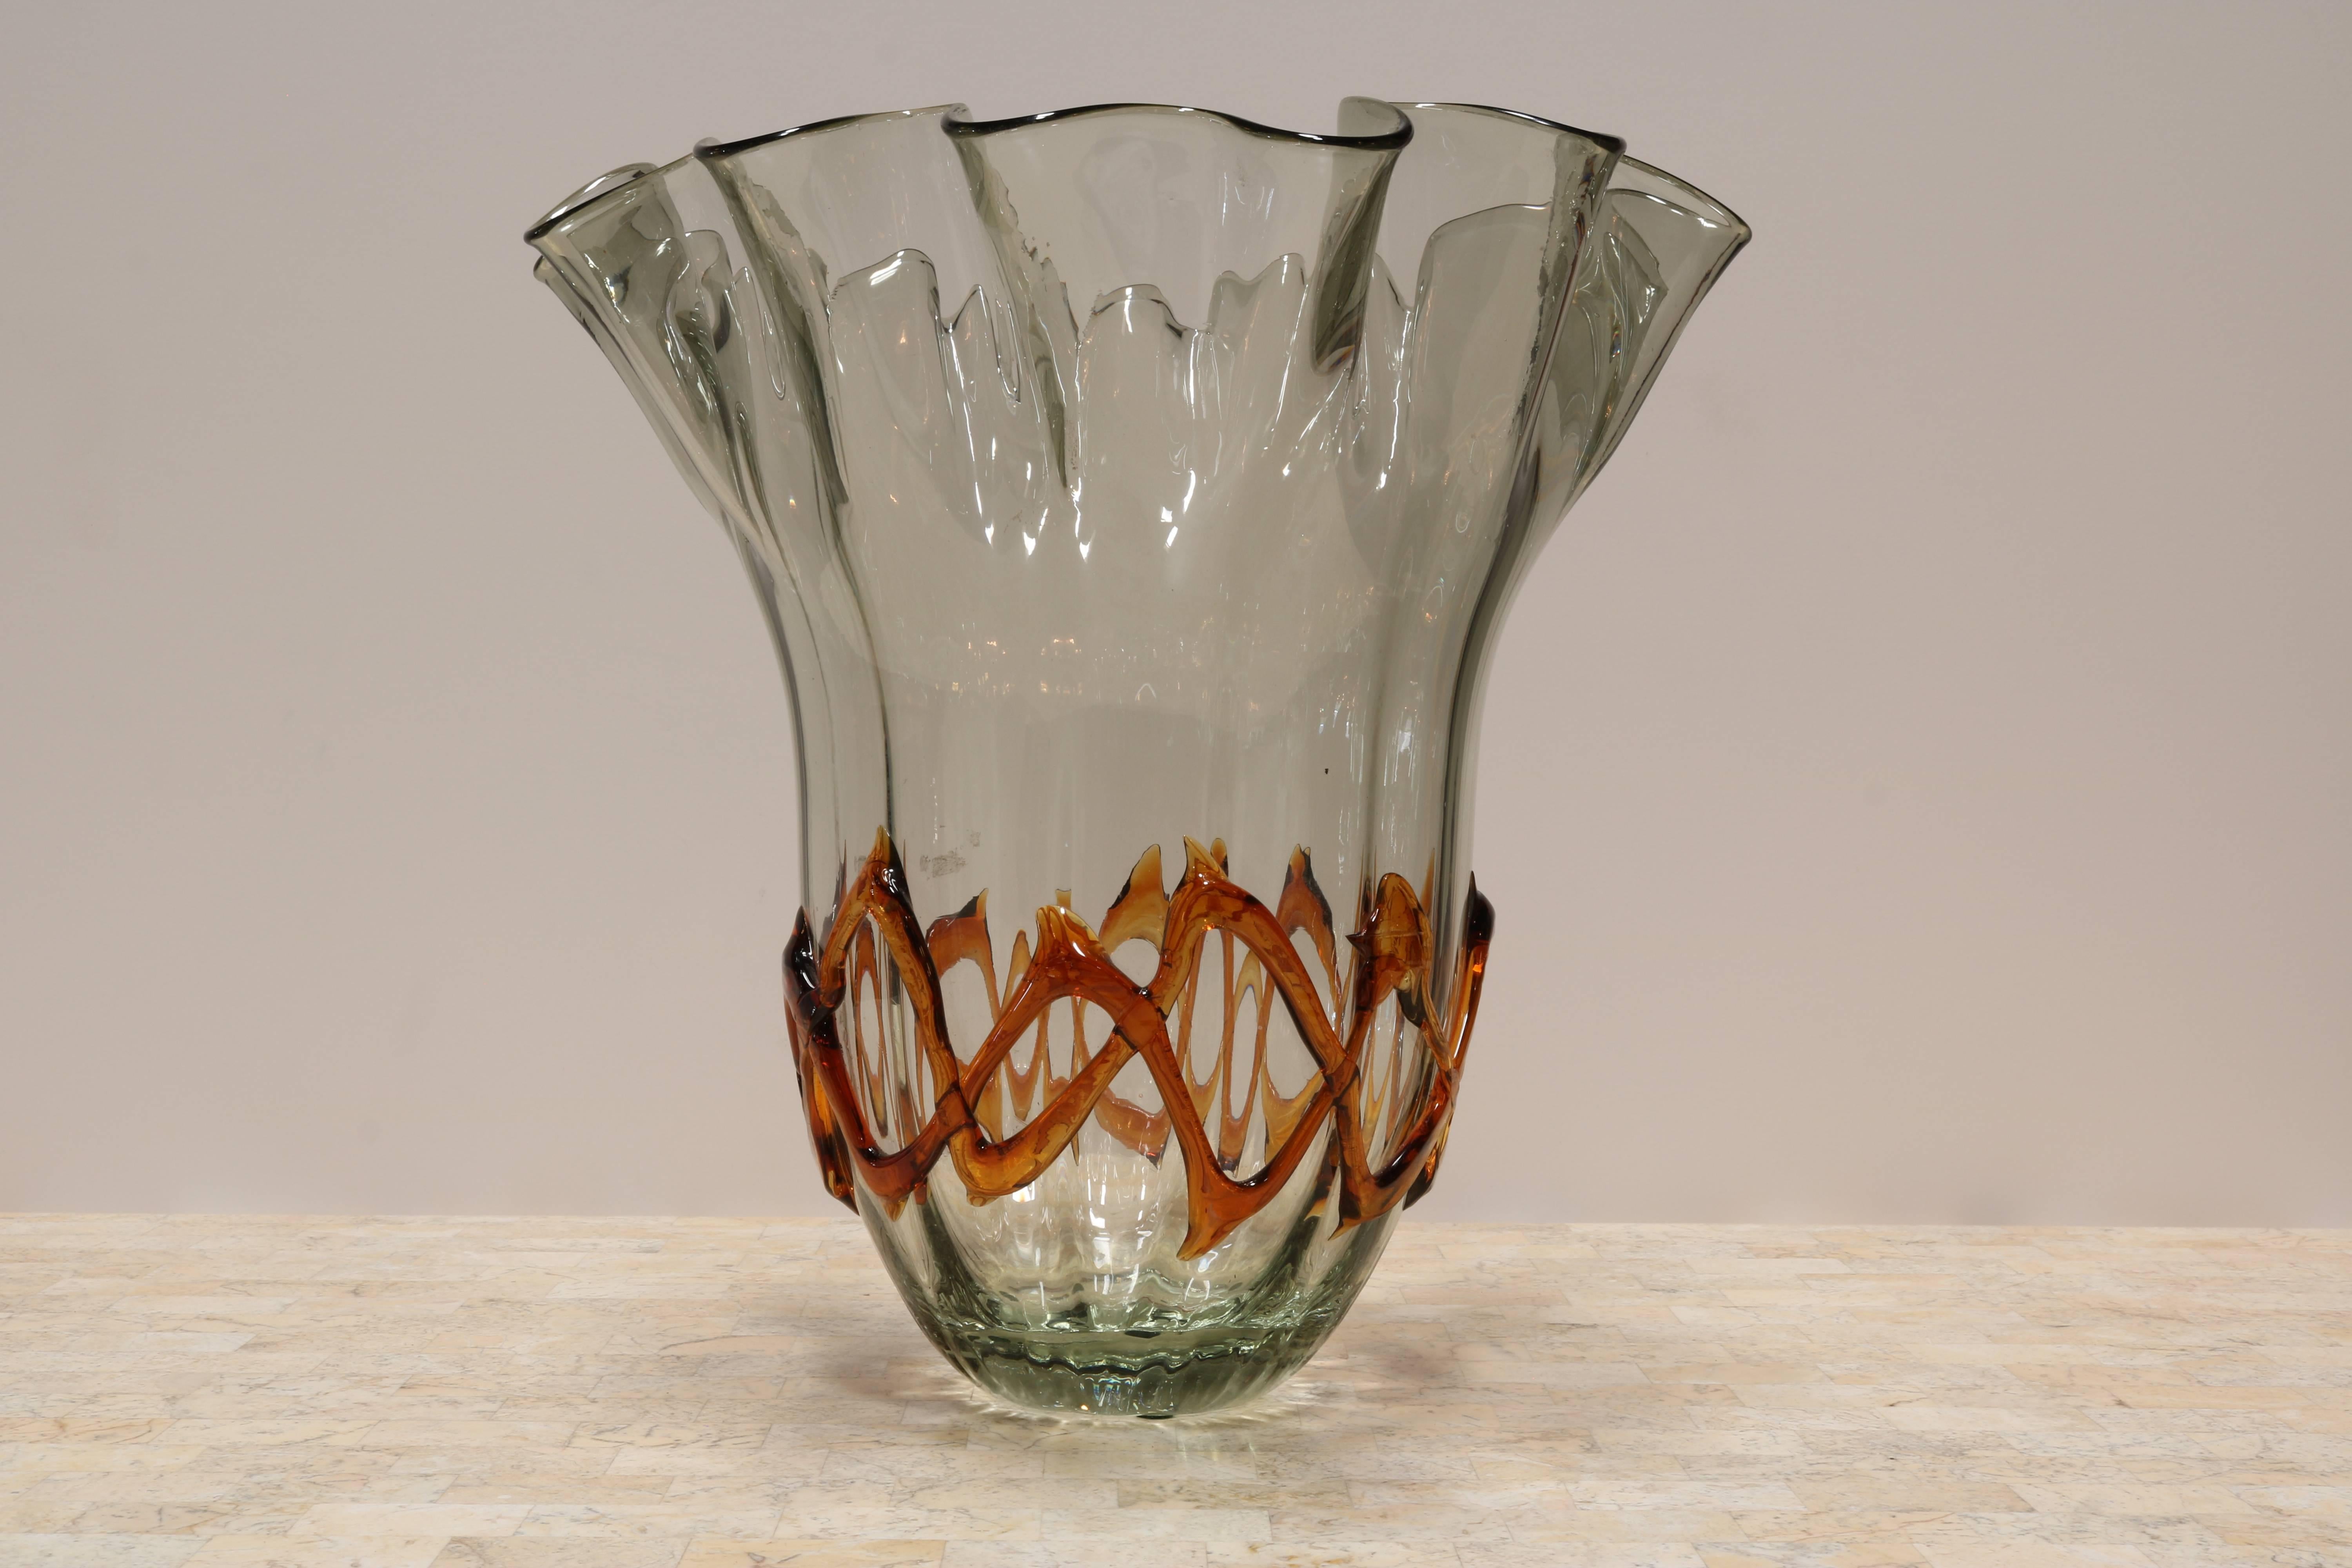 Fluted glass vase has a handkerchief edge and ribbons of amber colored glass around the bottom.